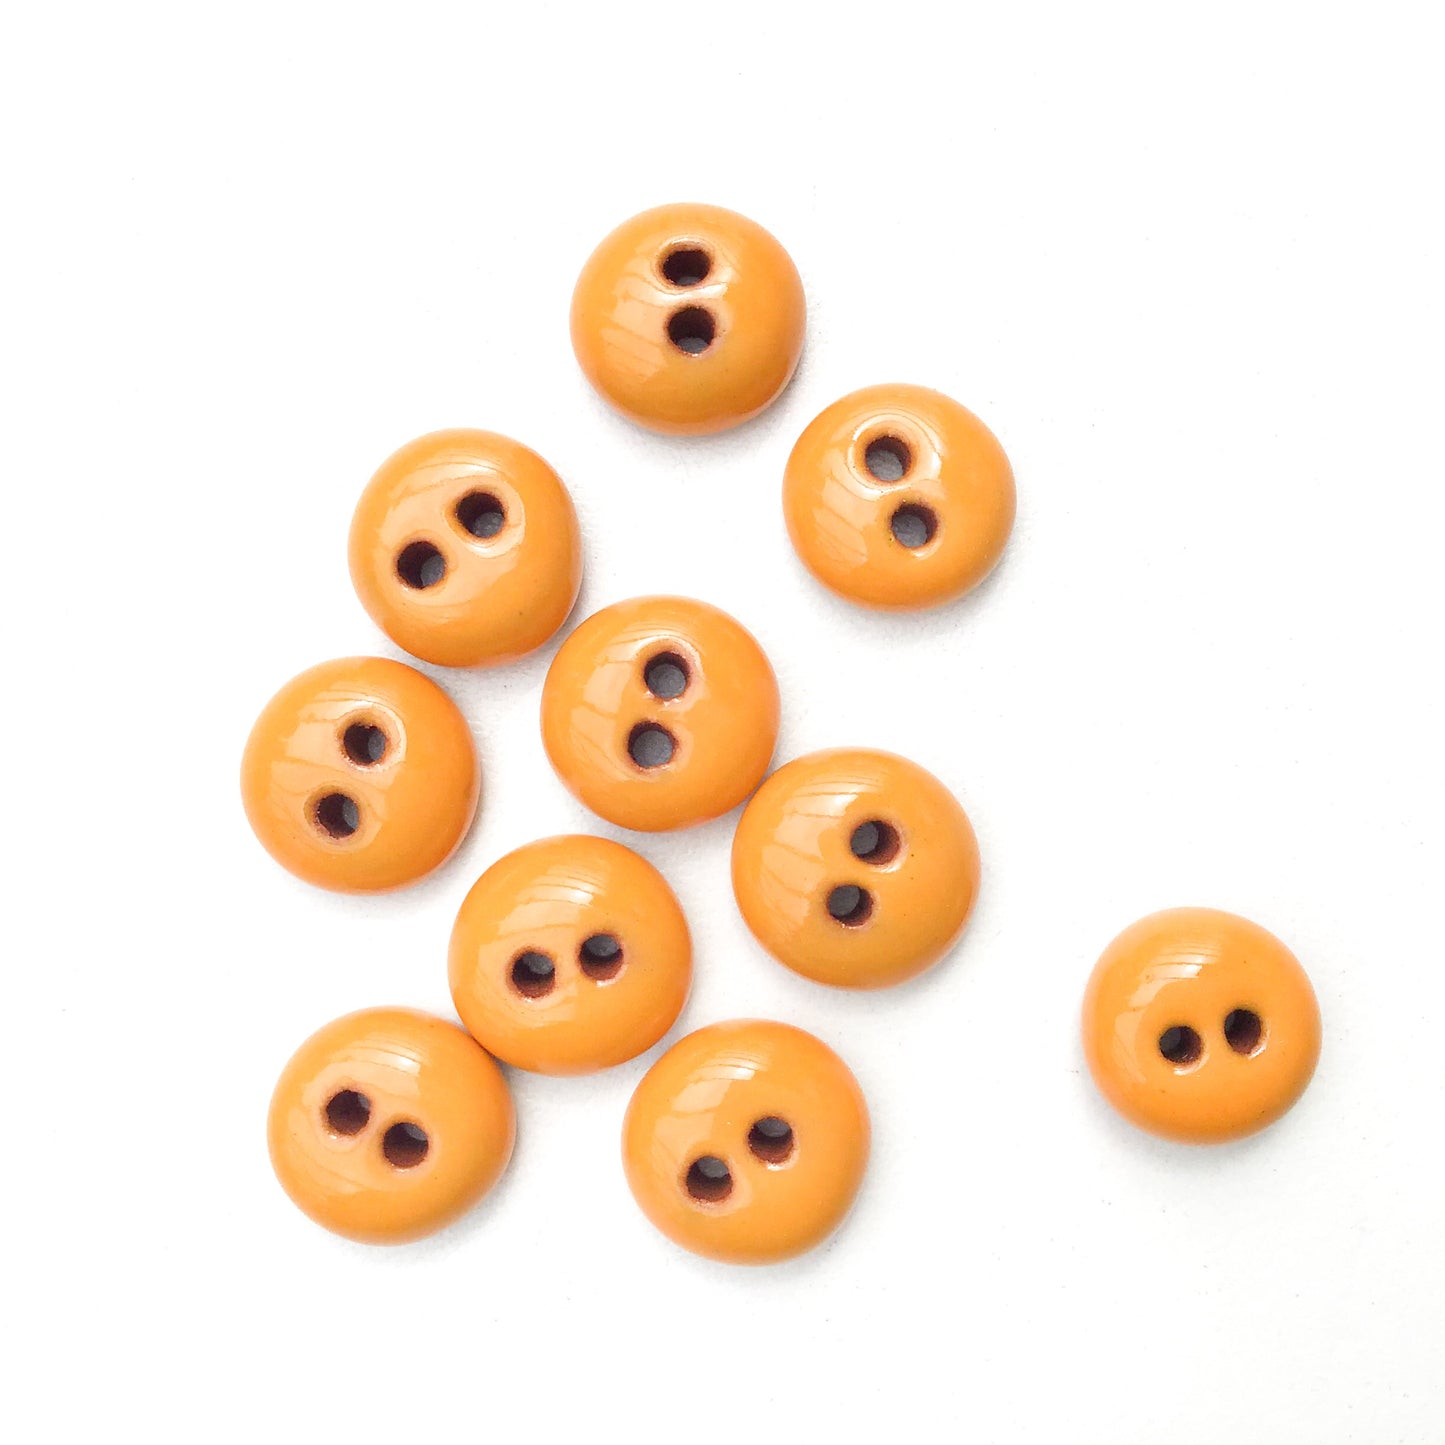 Orange Ceramic Buttons - Hand Made Clay Buttons - 7/16" - 10 Pack